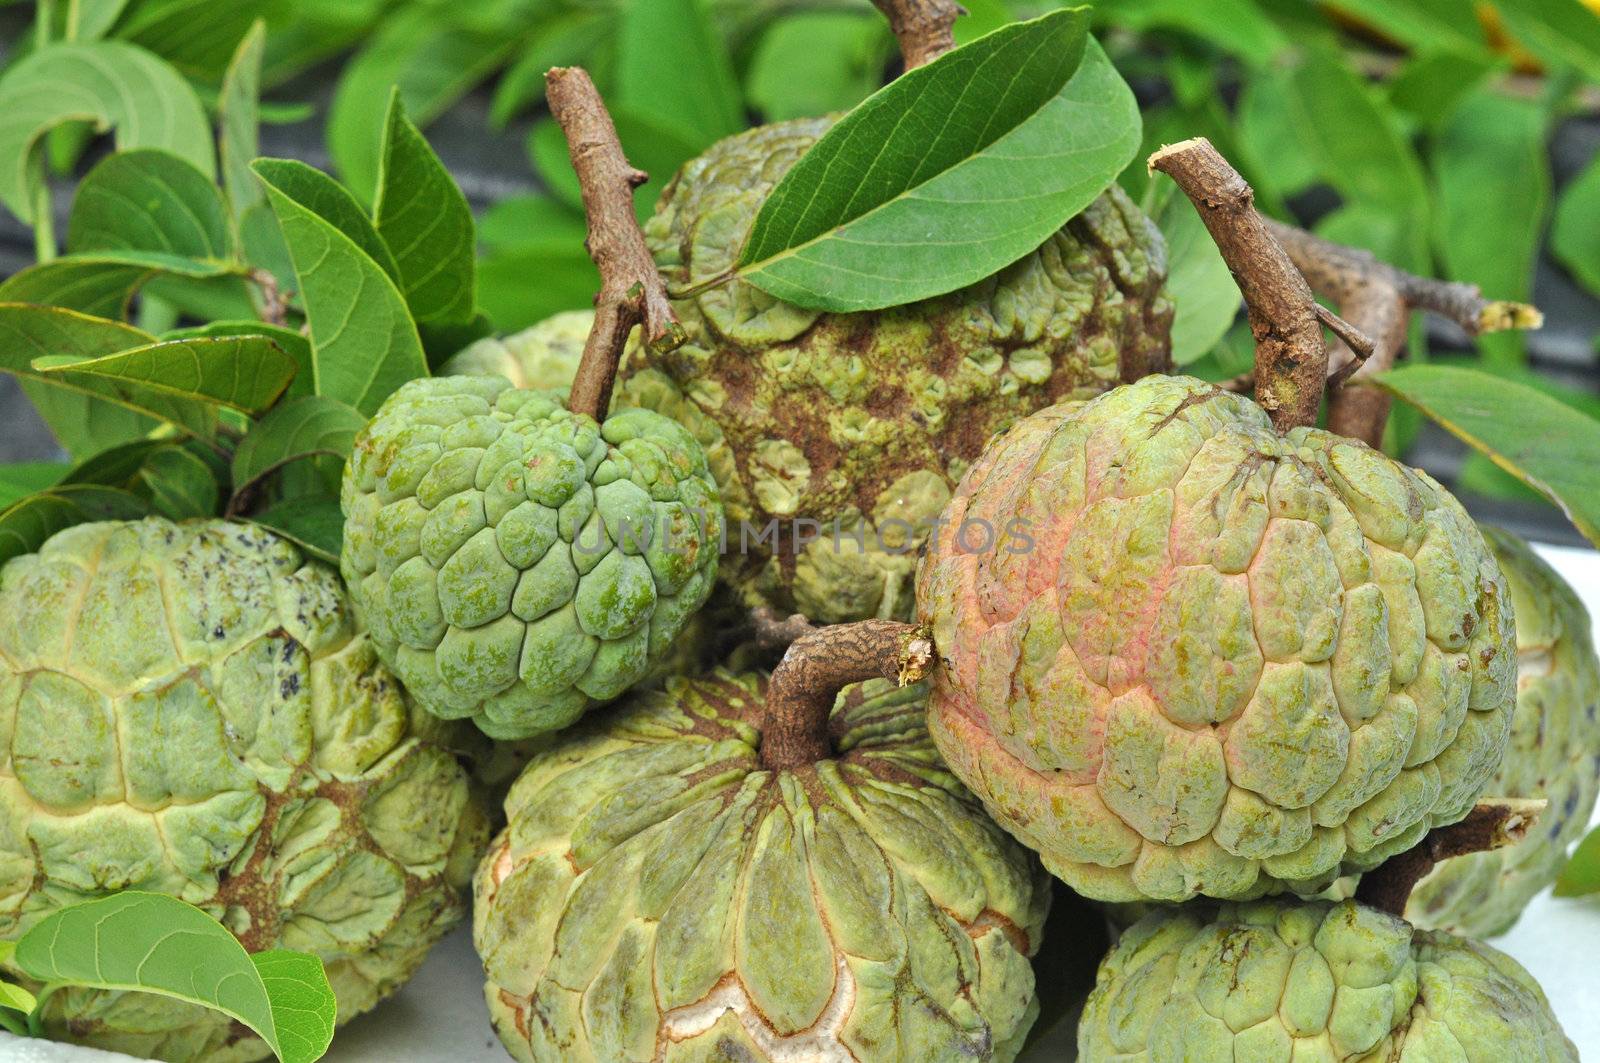 Sugar-apple fruit is high in calories and is a good source of iron